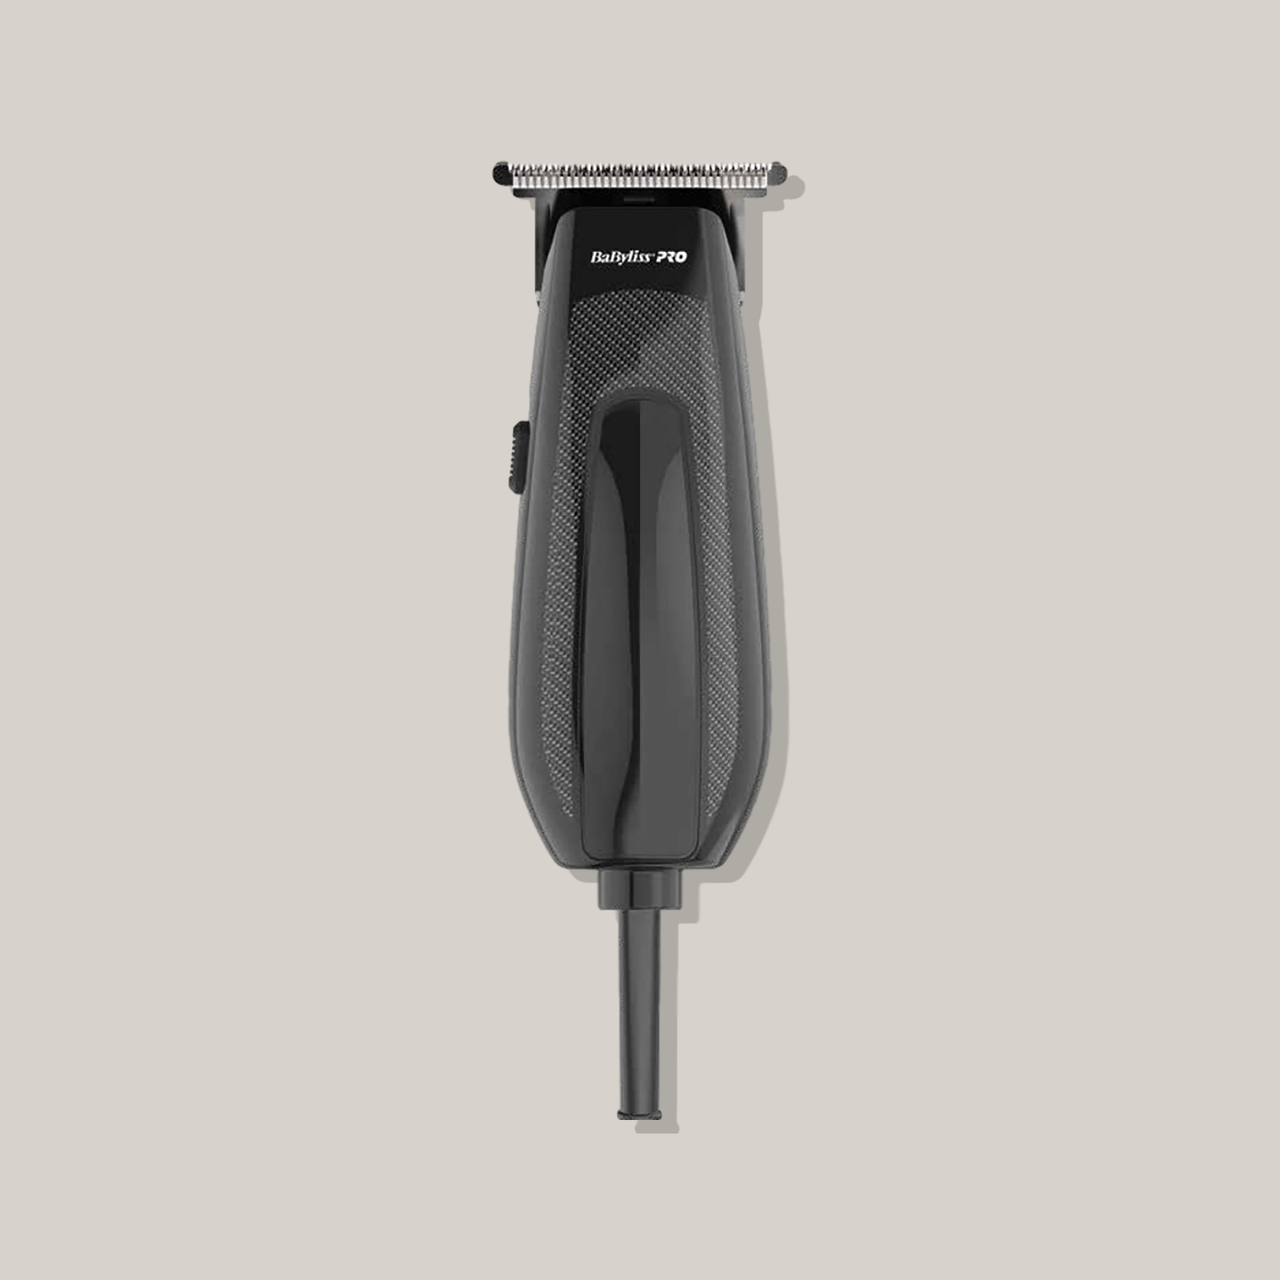 Babylisspro Small powerful corded trimmer ETCHFX #FX69 